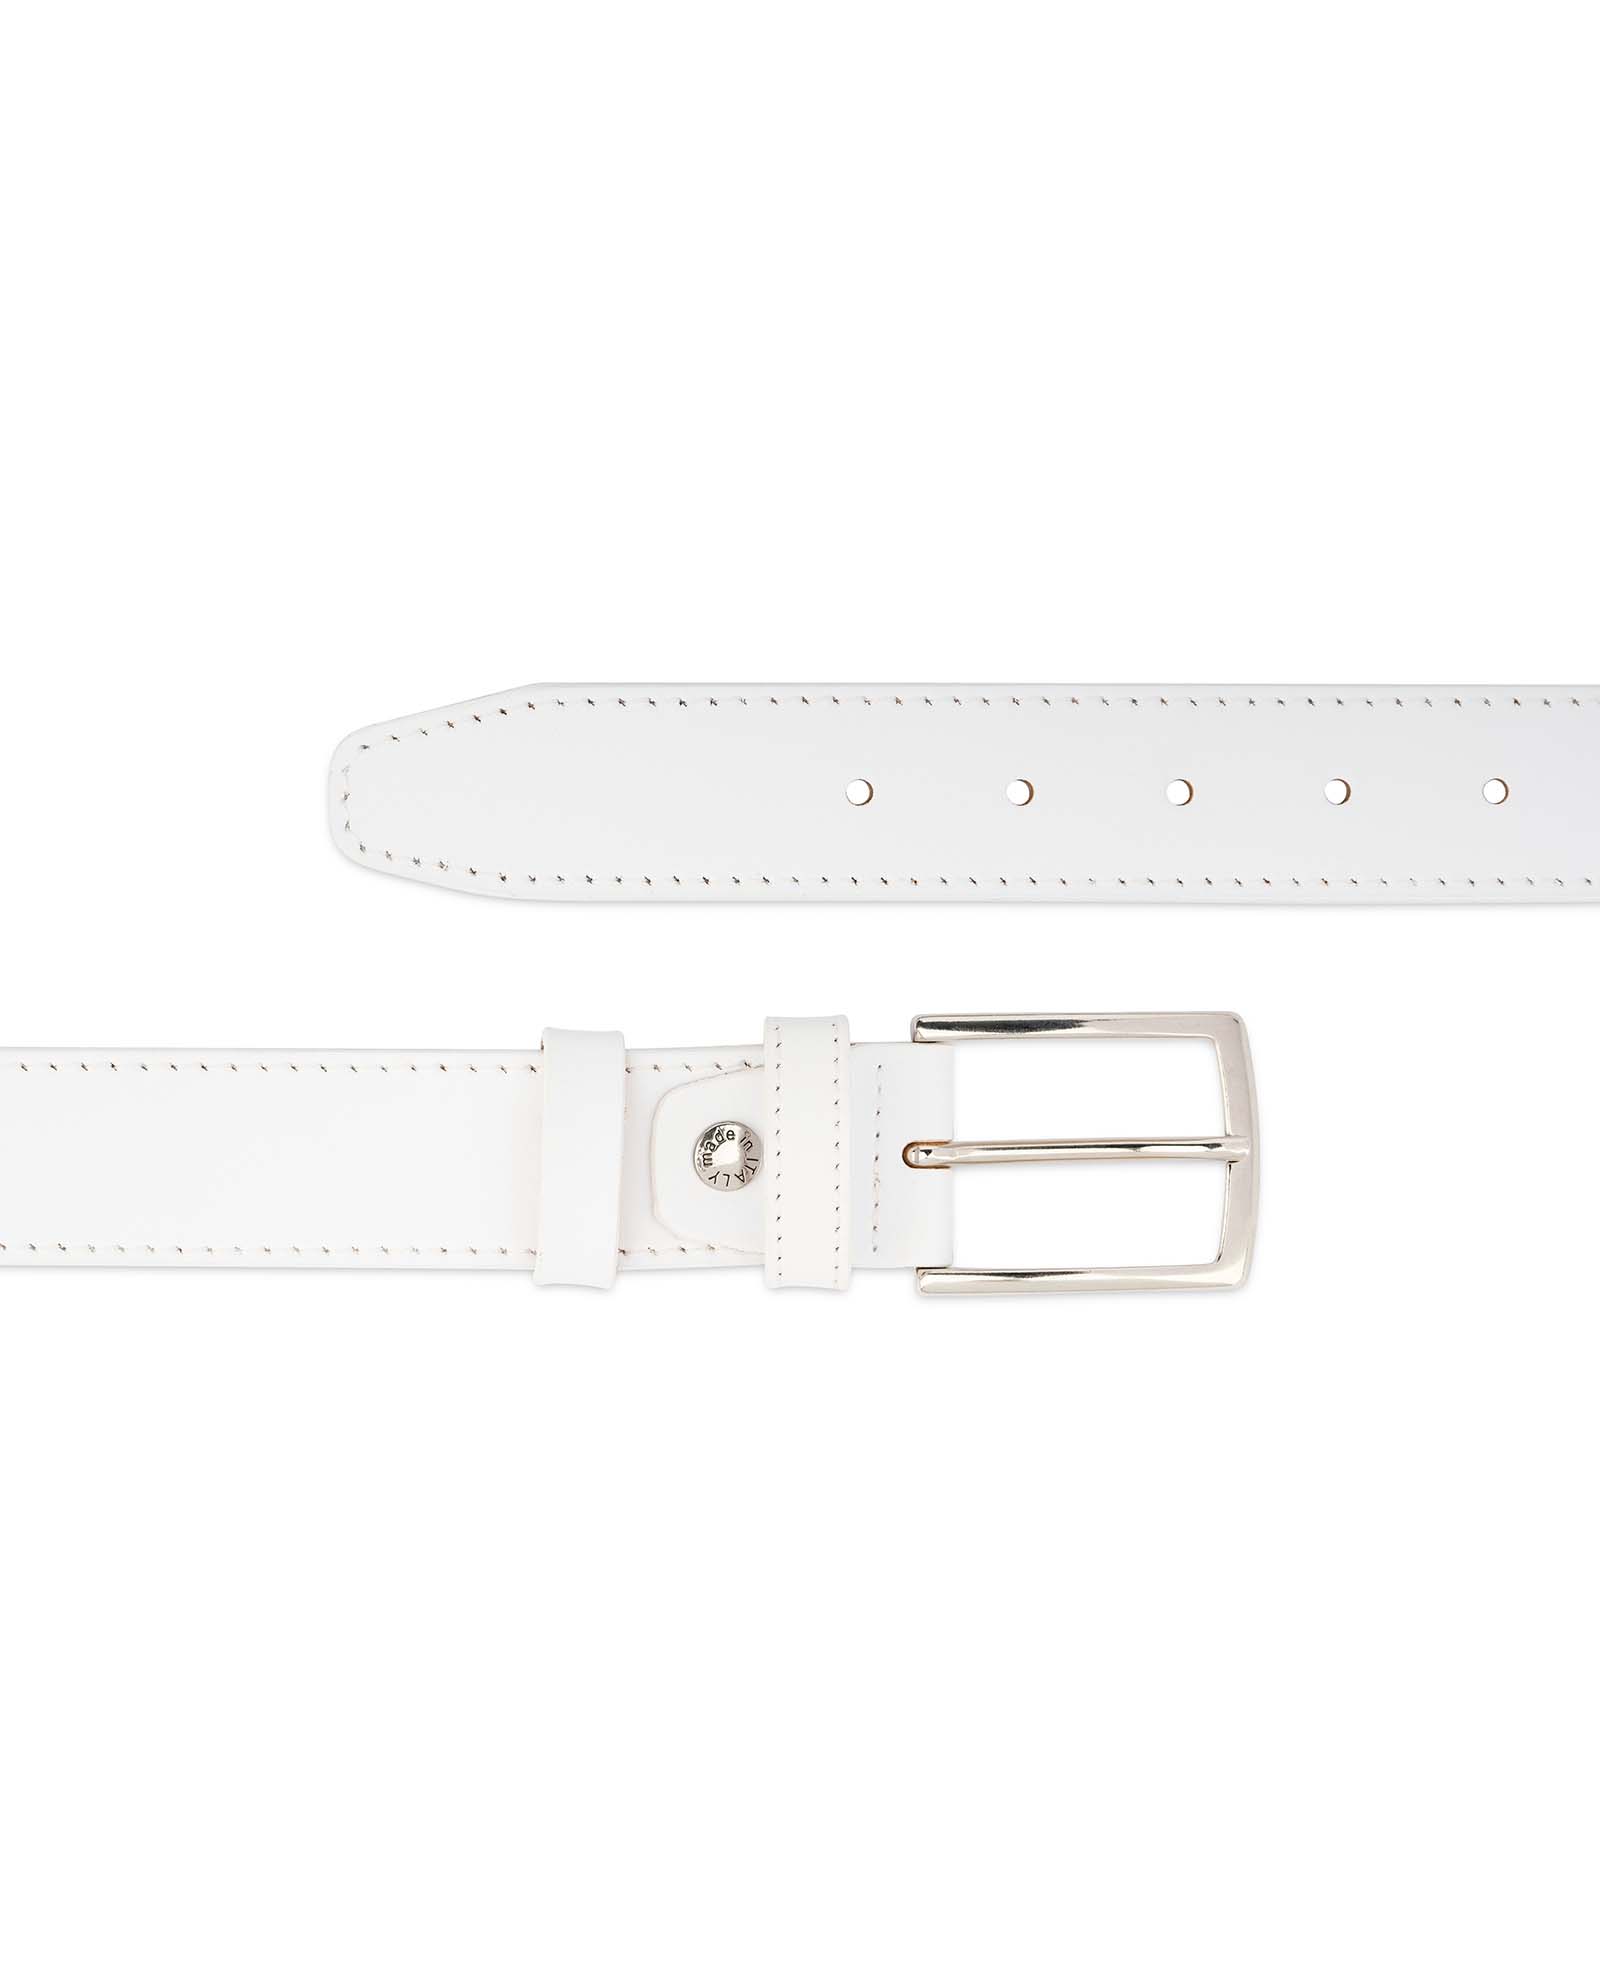 UM3 Mens Real Genuine Leather White Belt 1.25 Wide S-XL Thick Long Casual Jeans 